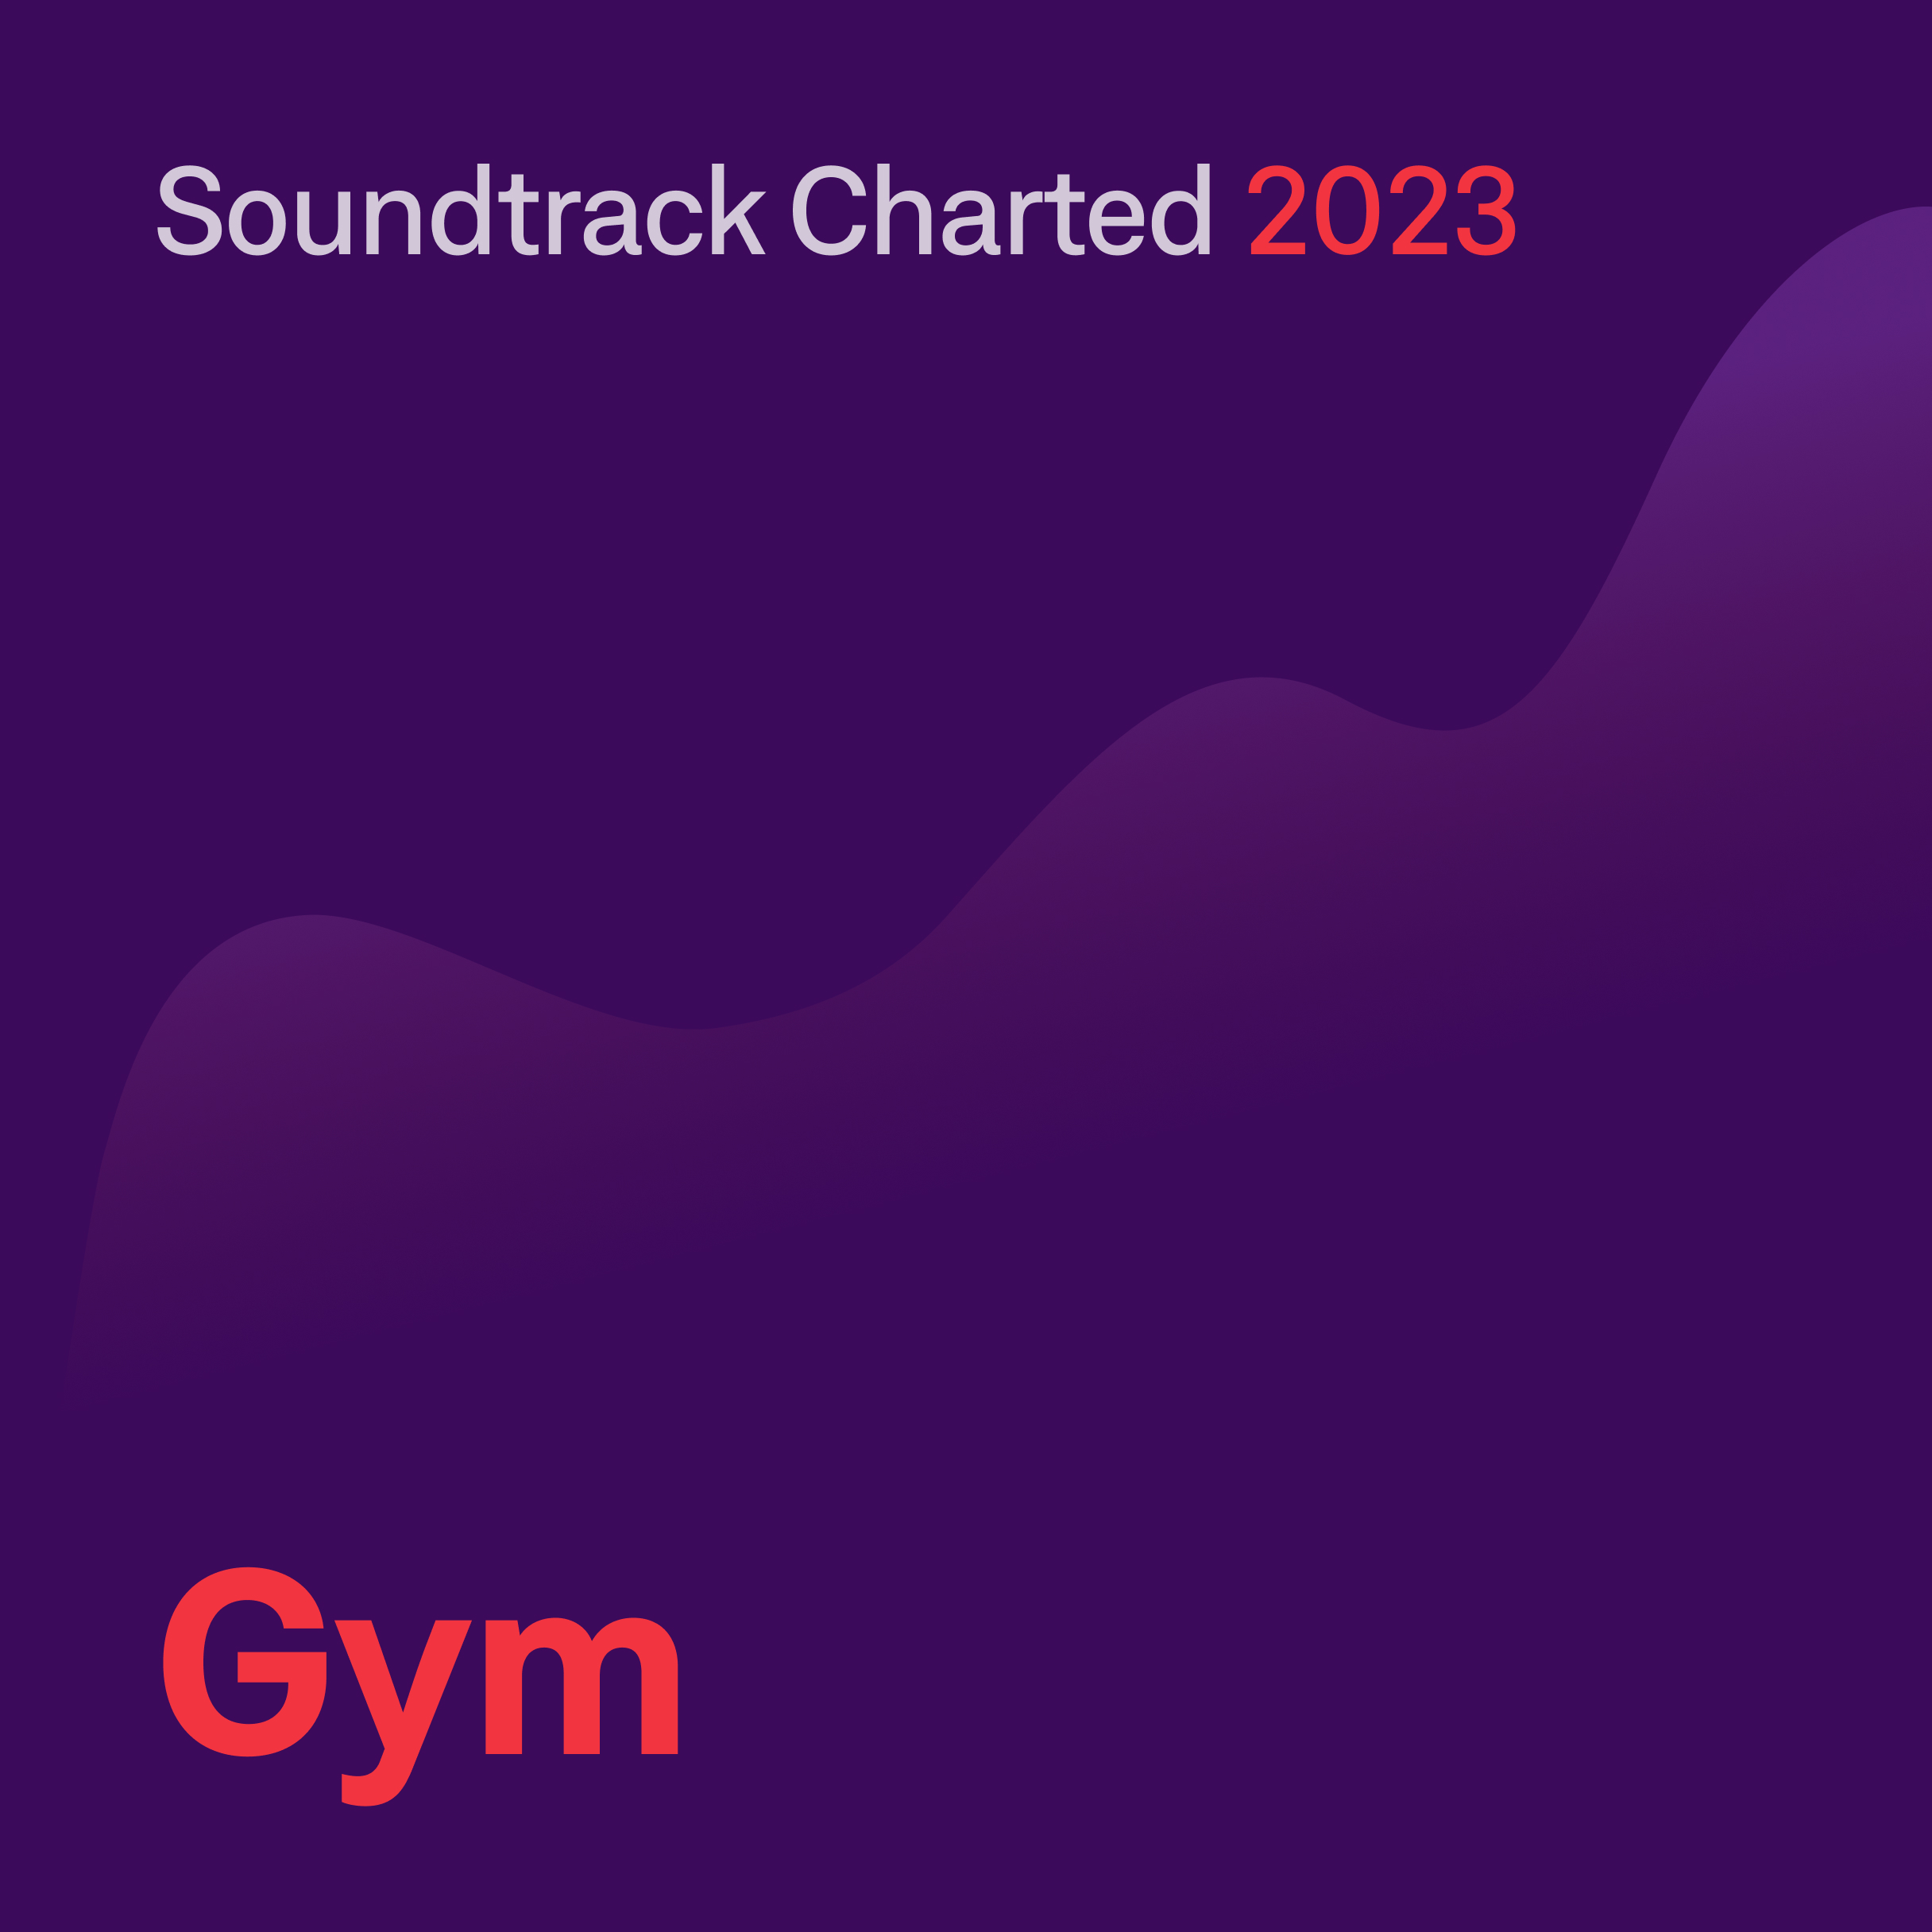 Soundtrack Charted 2023- Gyms